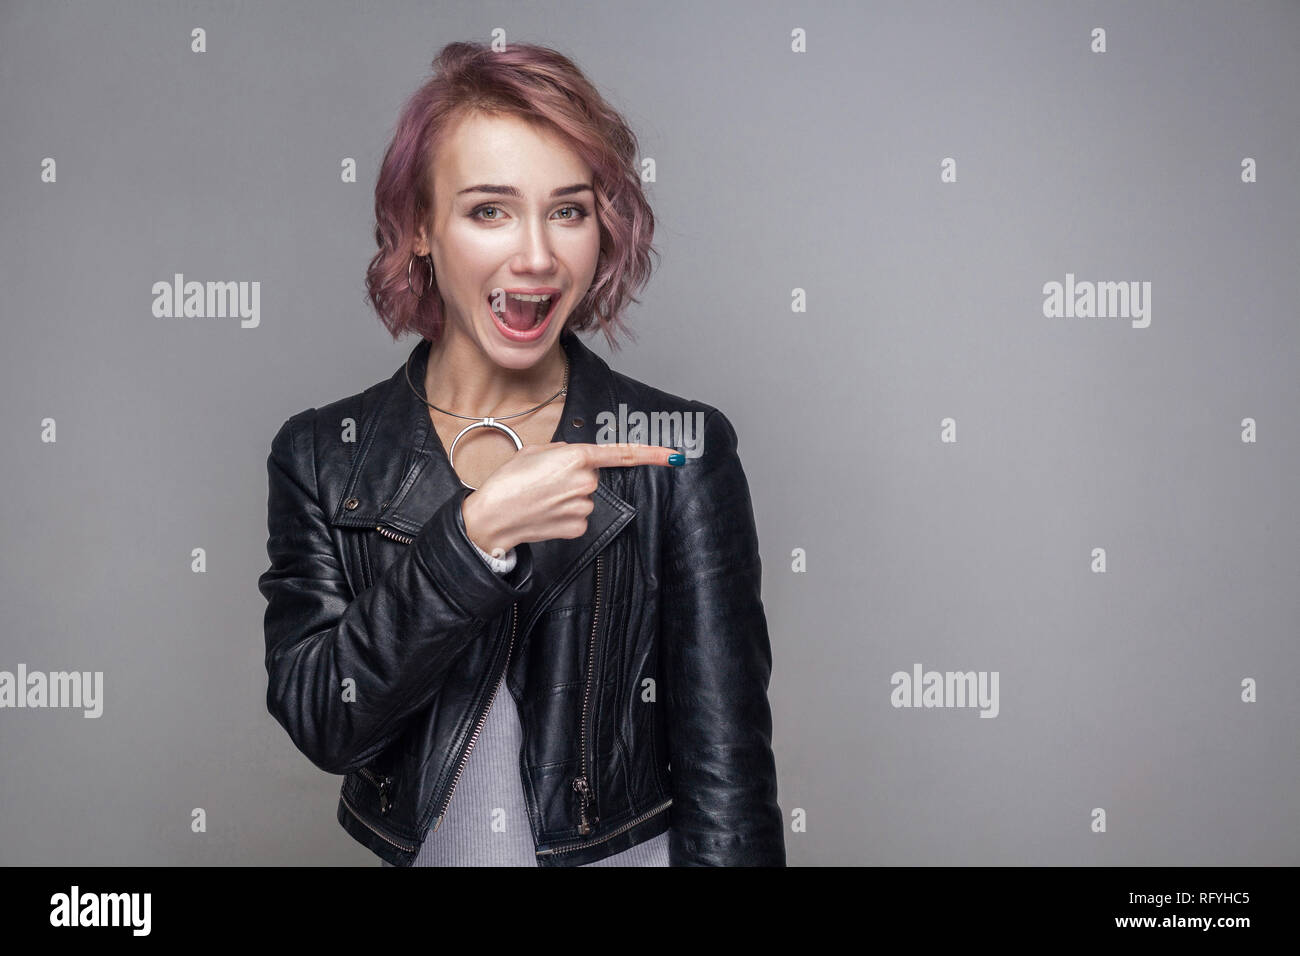 Portrait of surprised beautiful girl with short hairstyle and makeup in casual style black leather jacket standing, looking and pointing at copyspace. Stock Photo